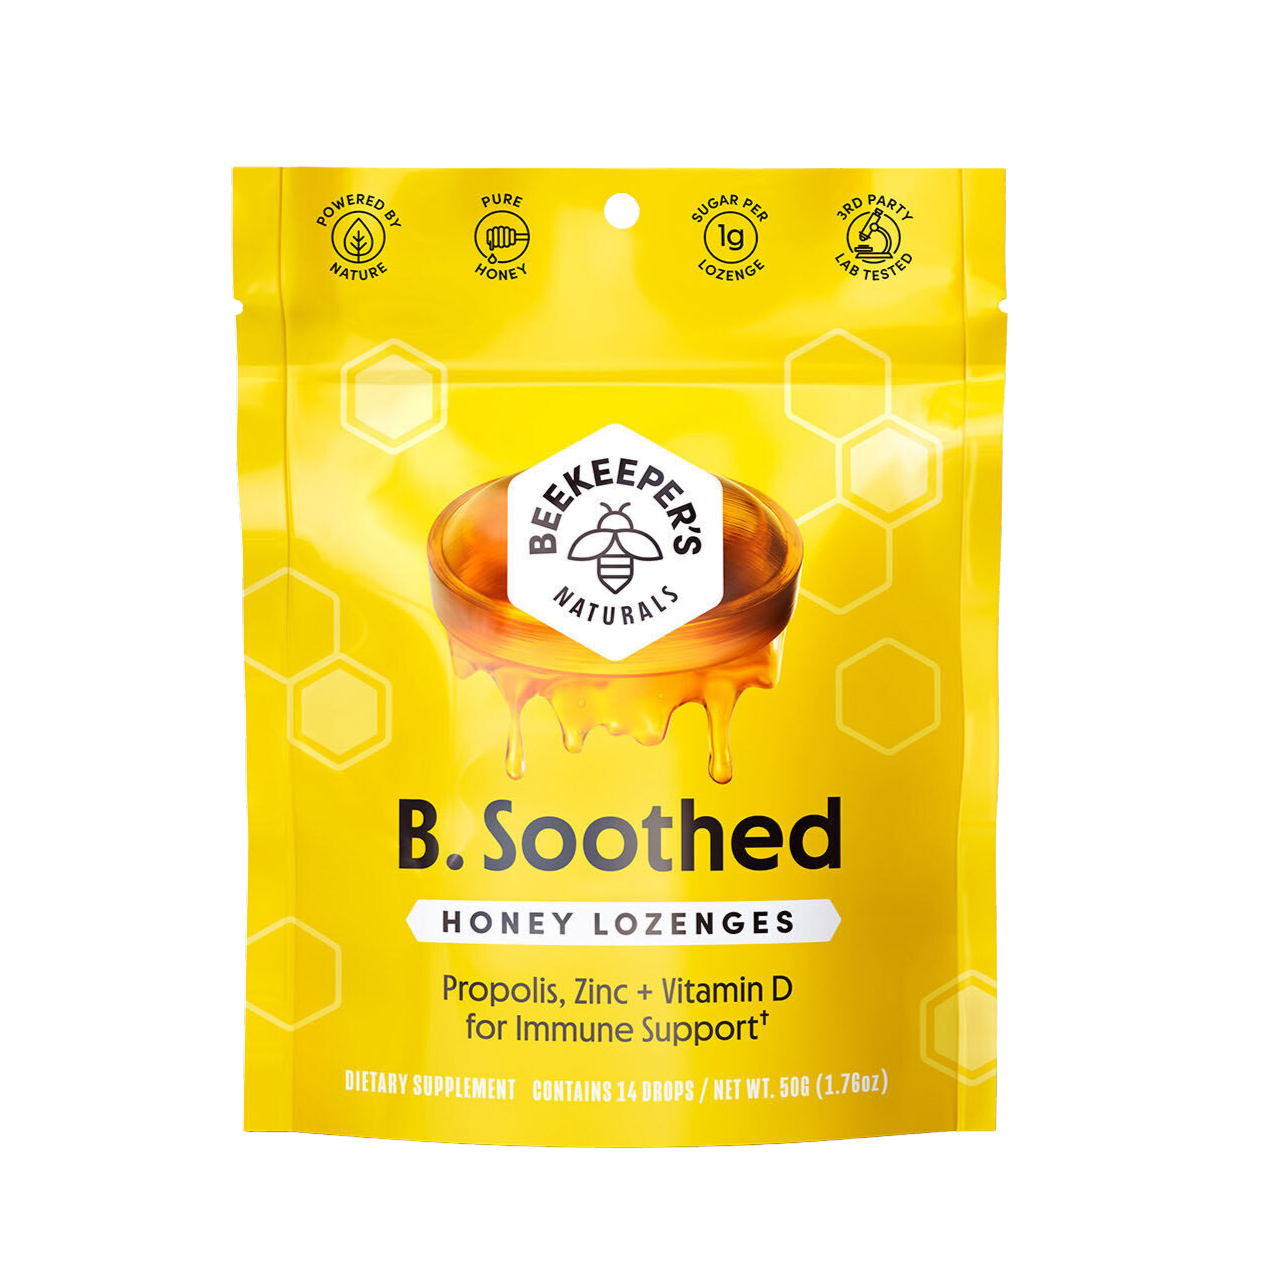 Image of Beekeeper's Naturals Soothing Honey Lozenges